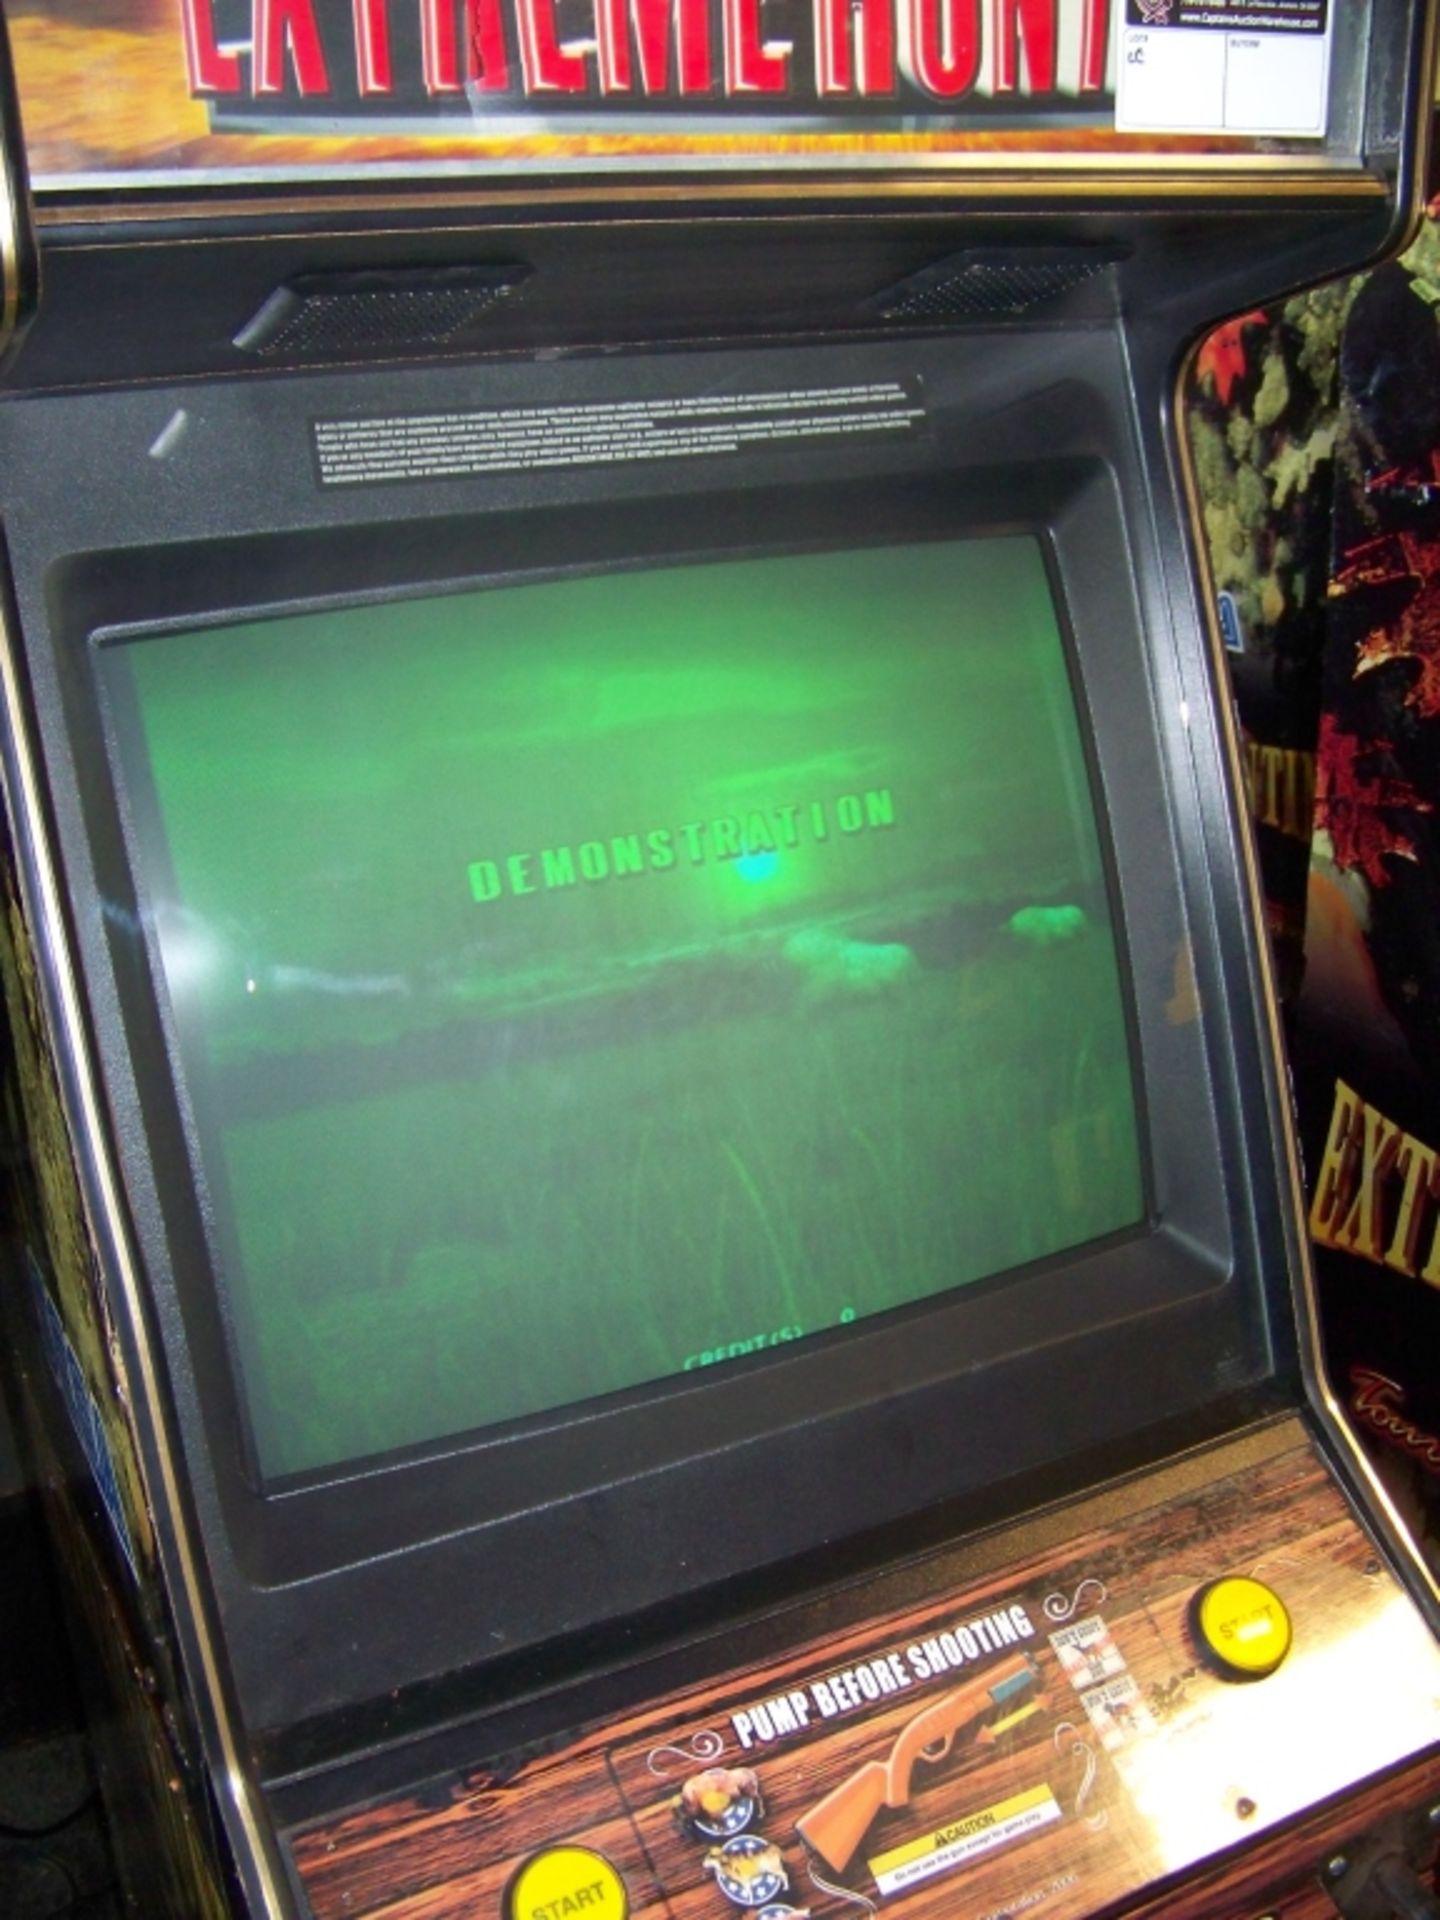 EXTREME HUNTING 2 SHOOTER ARCADE GAME - Image 3 of 4